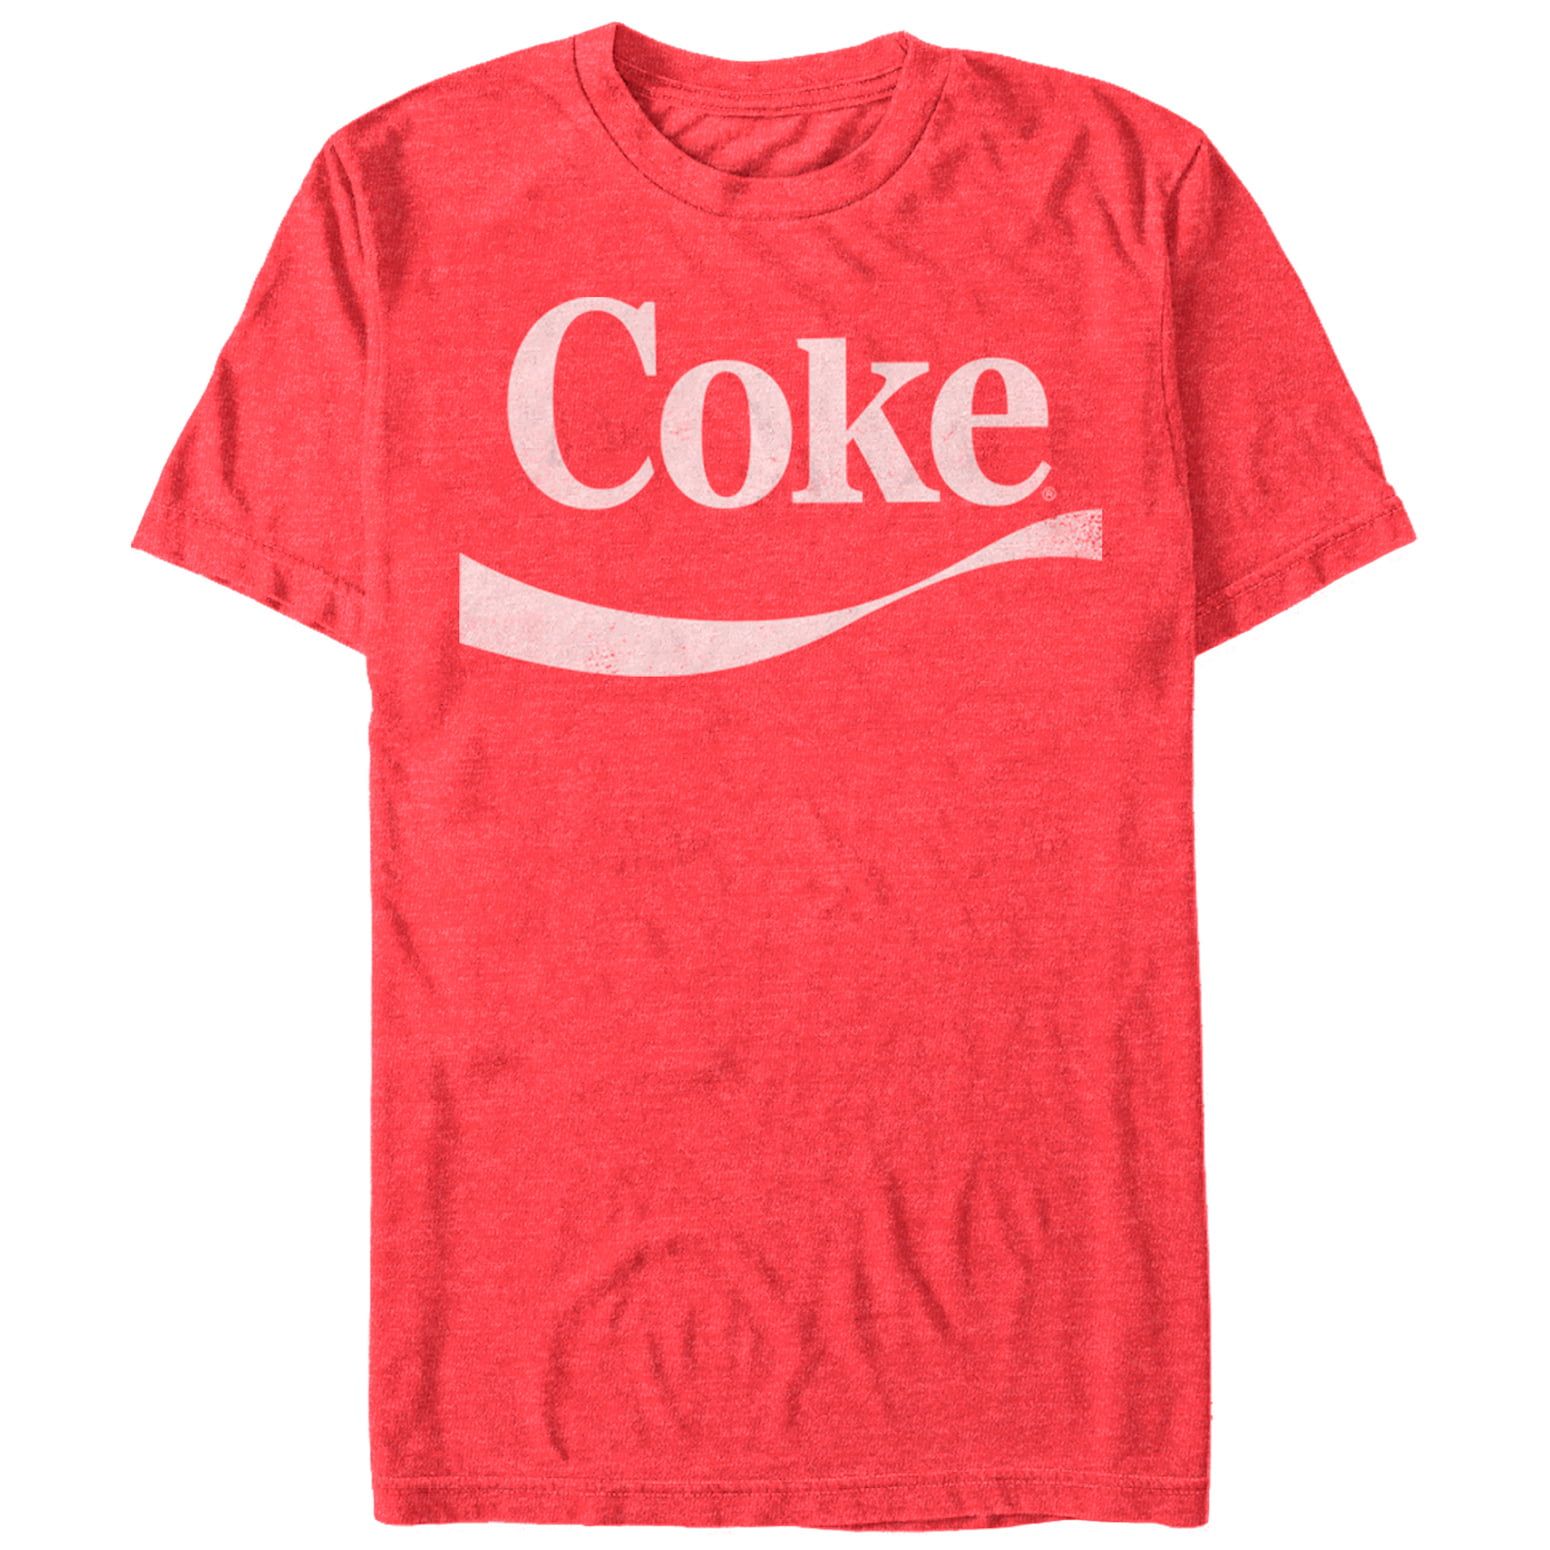 Coca Cola White Play Refreshed Men's T-Shirt